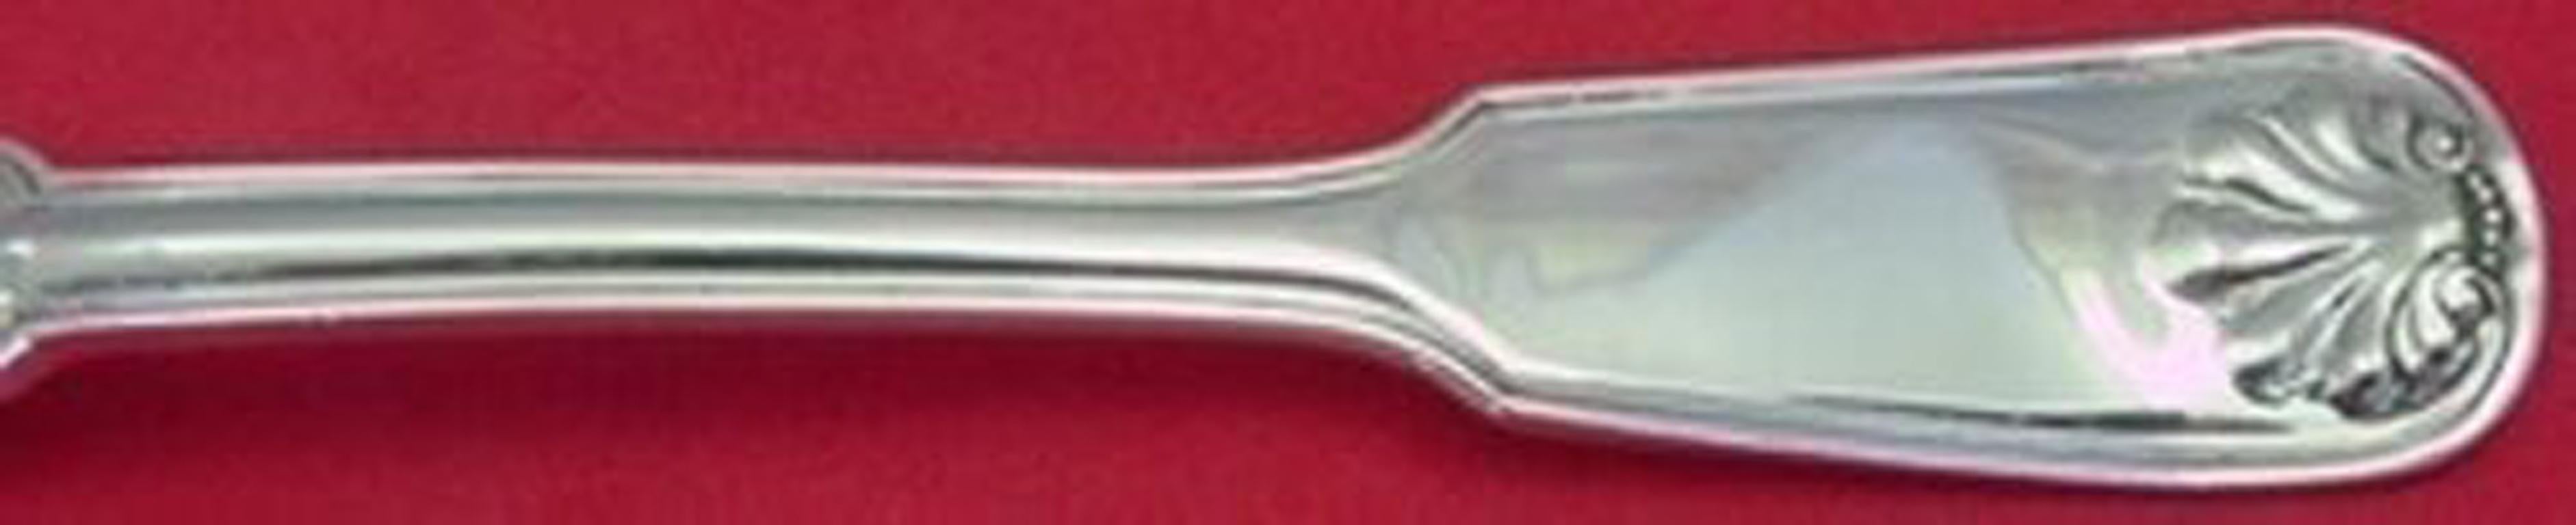 Shell and thread by Tiffany & Co. sterling silver flat handle pie server all sterling, serrated, 10 7/8